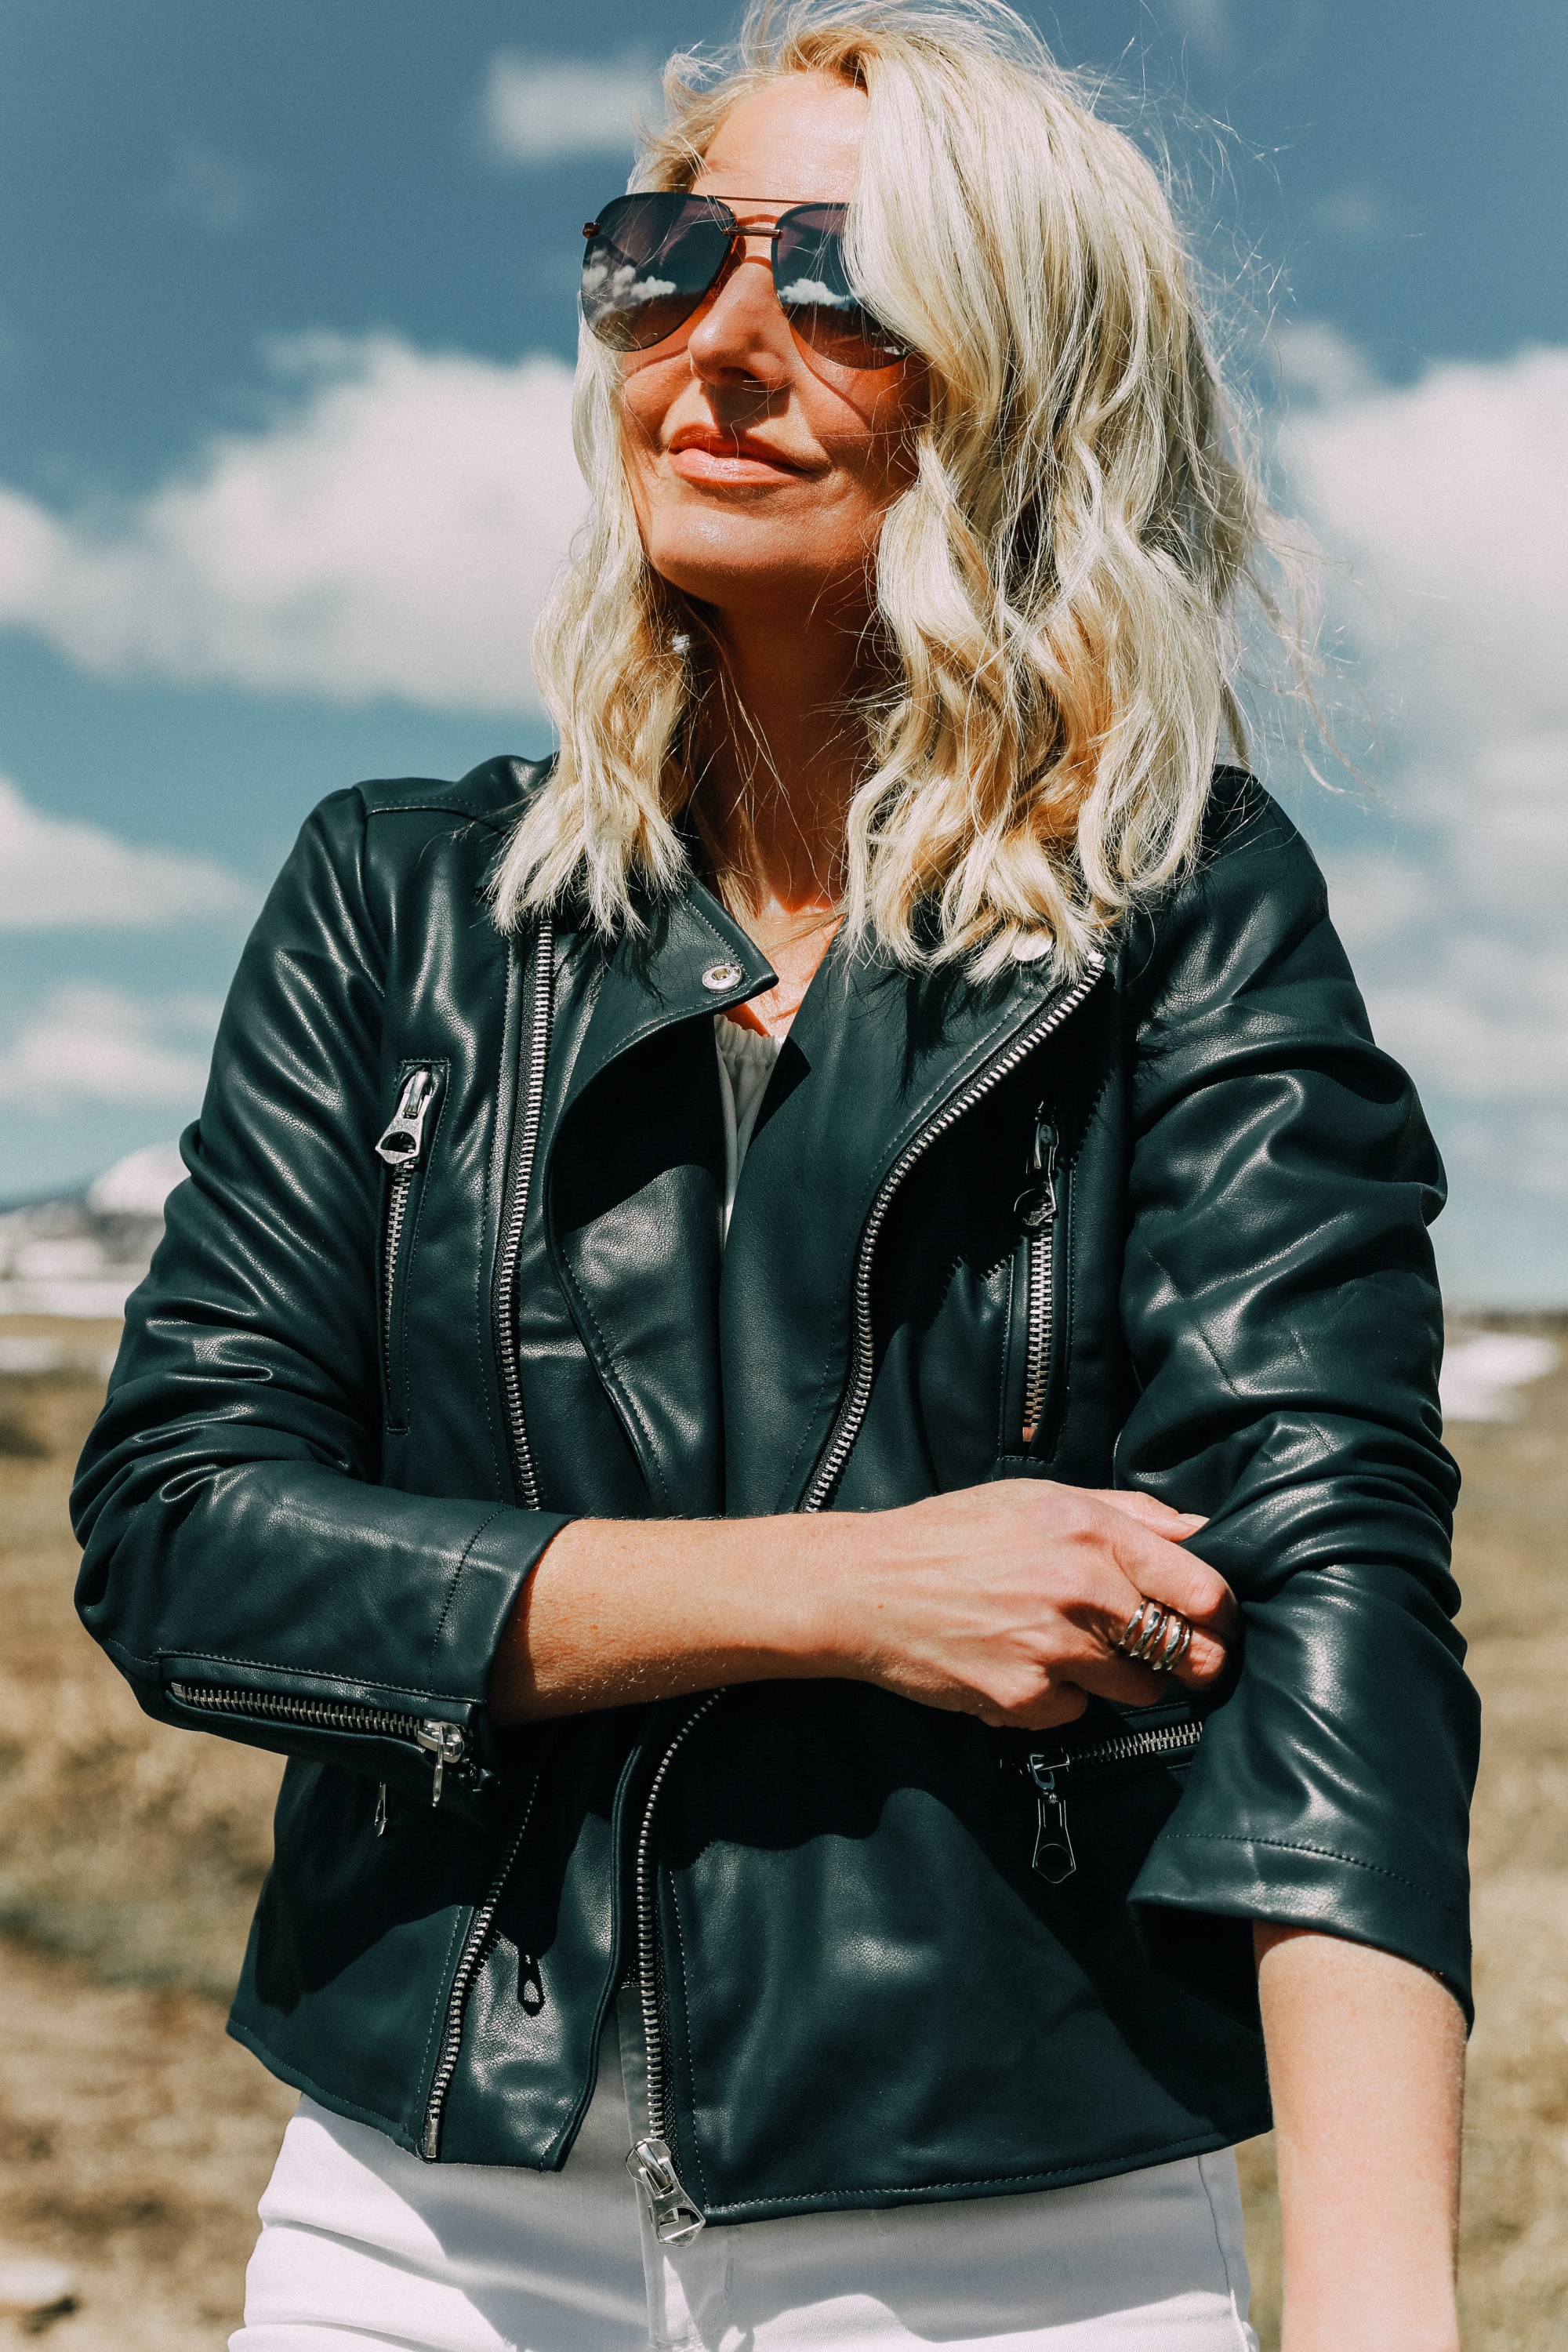 Spring style staples, fashion blogger Erin Busbee of BusbeeStyle.com wearing a white bell sleeve off the shoulder blouse under a navy faux leather moto jacket with white kick flare jeans by Scoop from Walmart in Telluride, CO